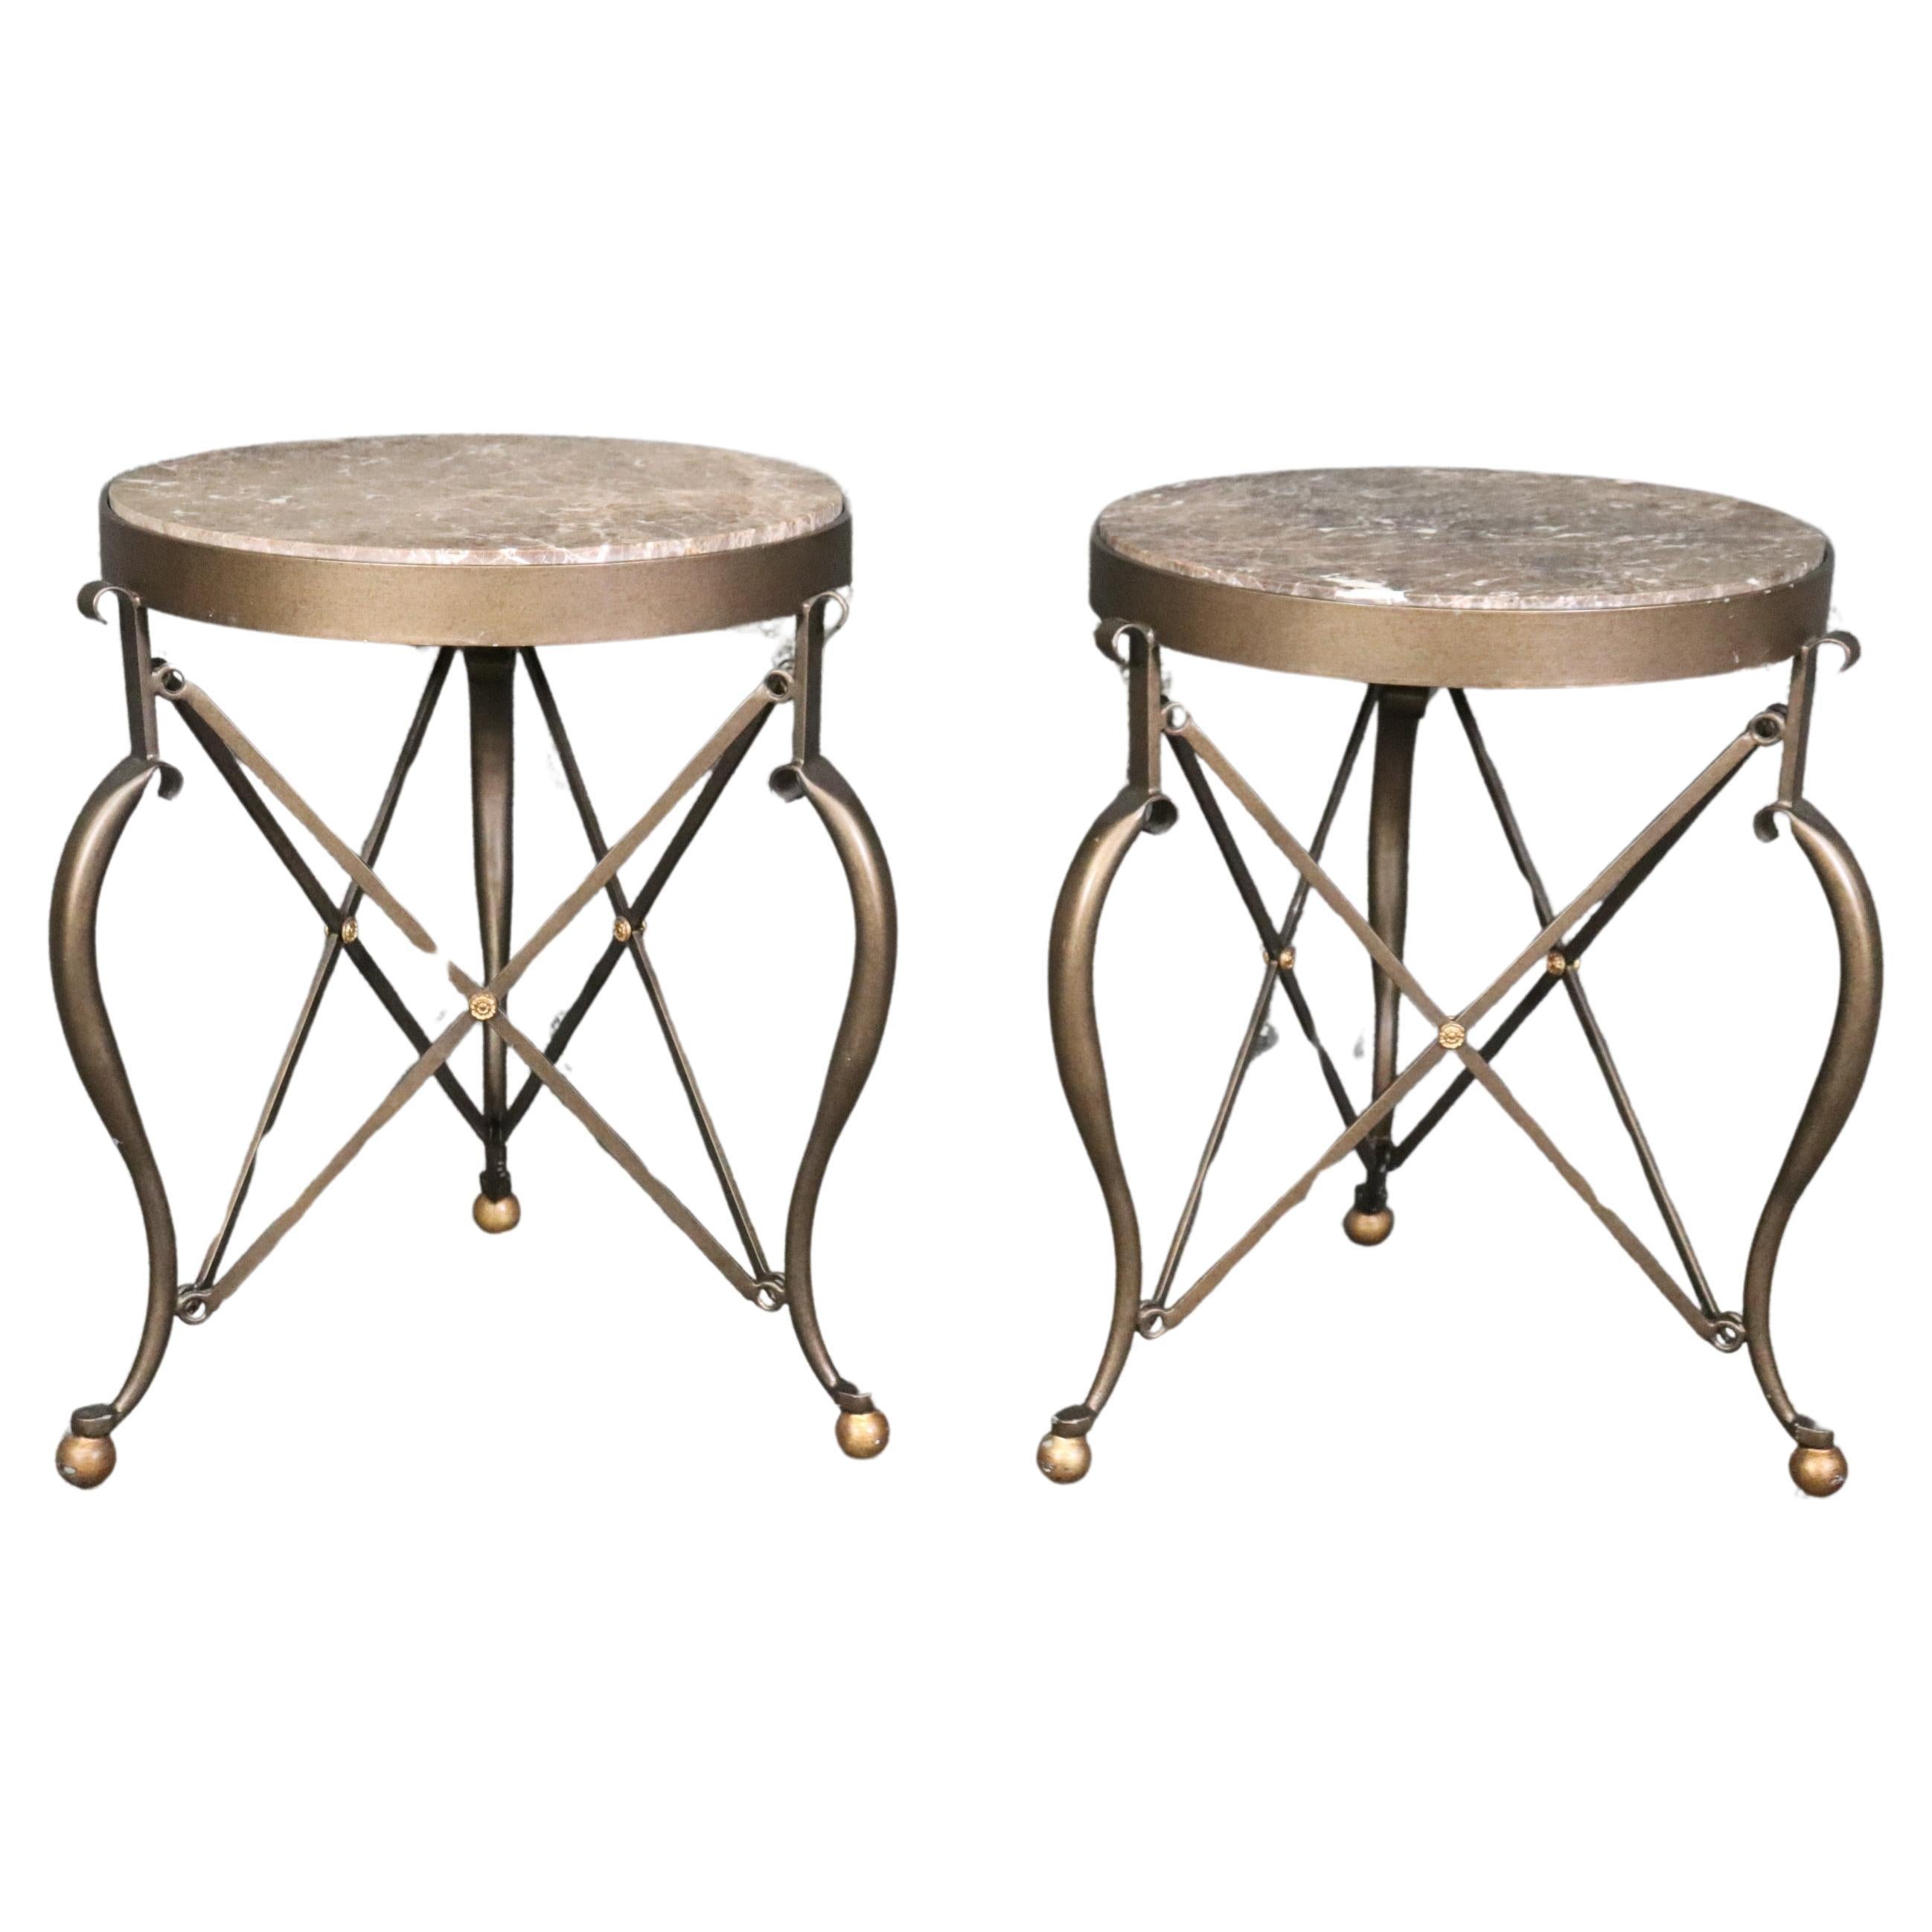 Pair of Round French Directoire Style Bronze Colored Steel Marble Top Gueridons For Sale